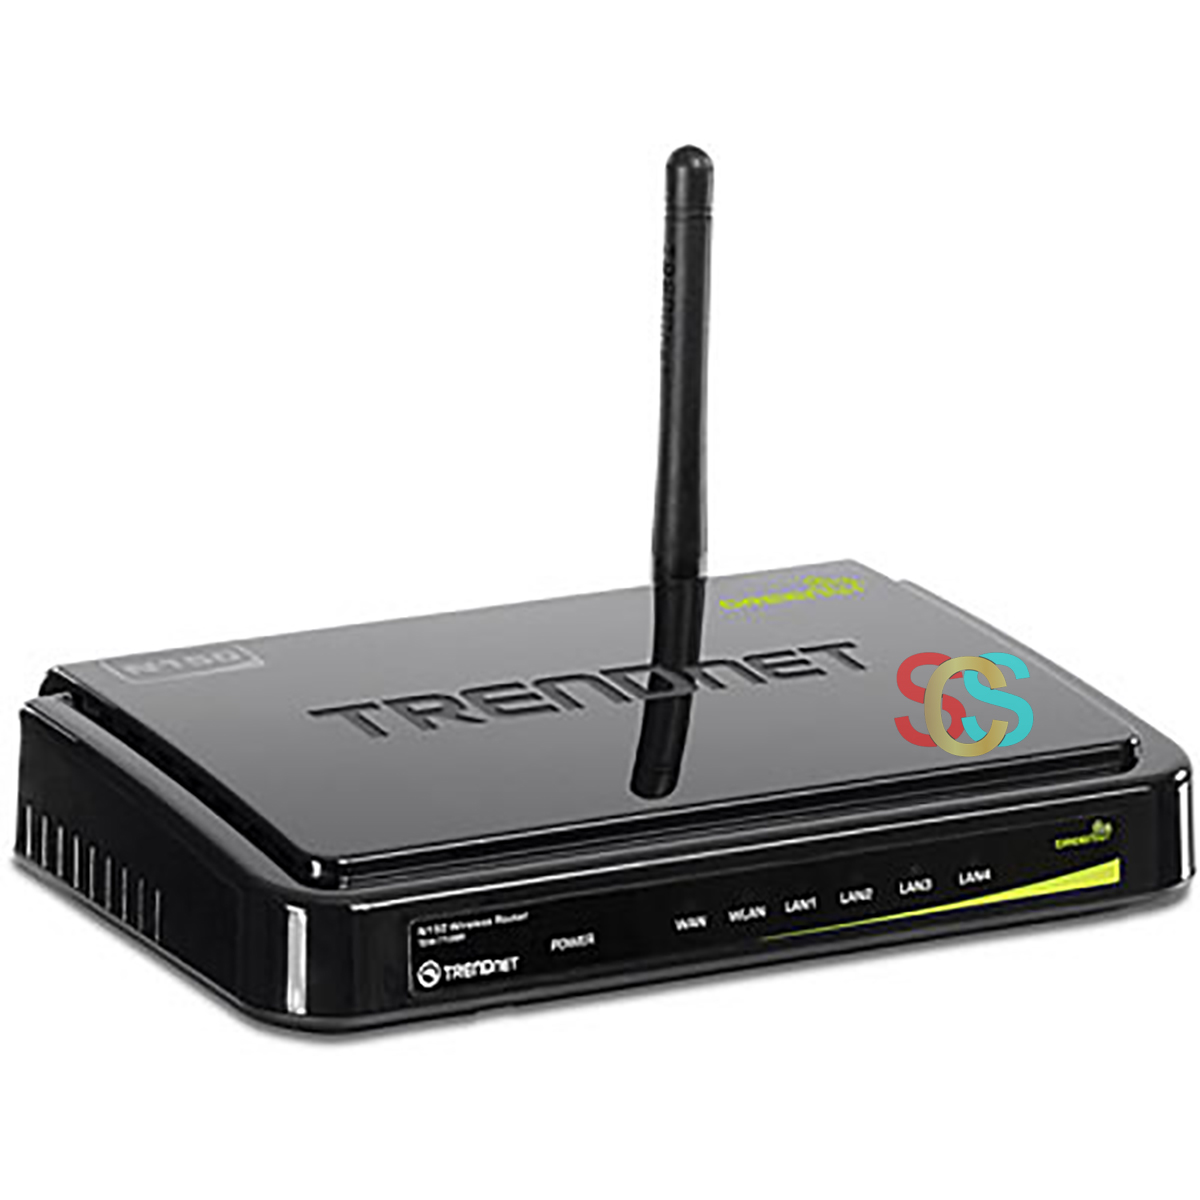 Trendnet TEW-711BR 150 Mbps Ethernet Single-Band Wi-Fi Router